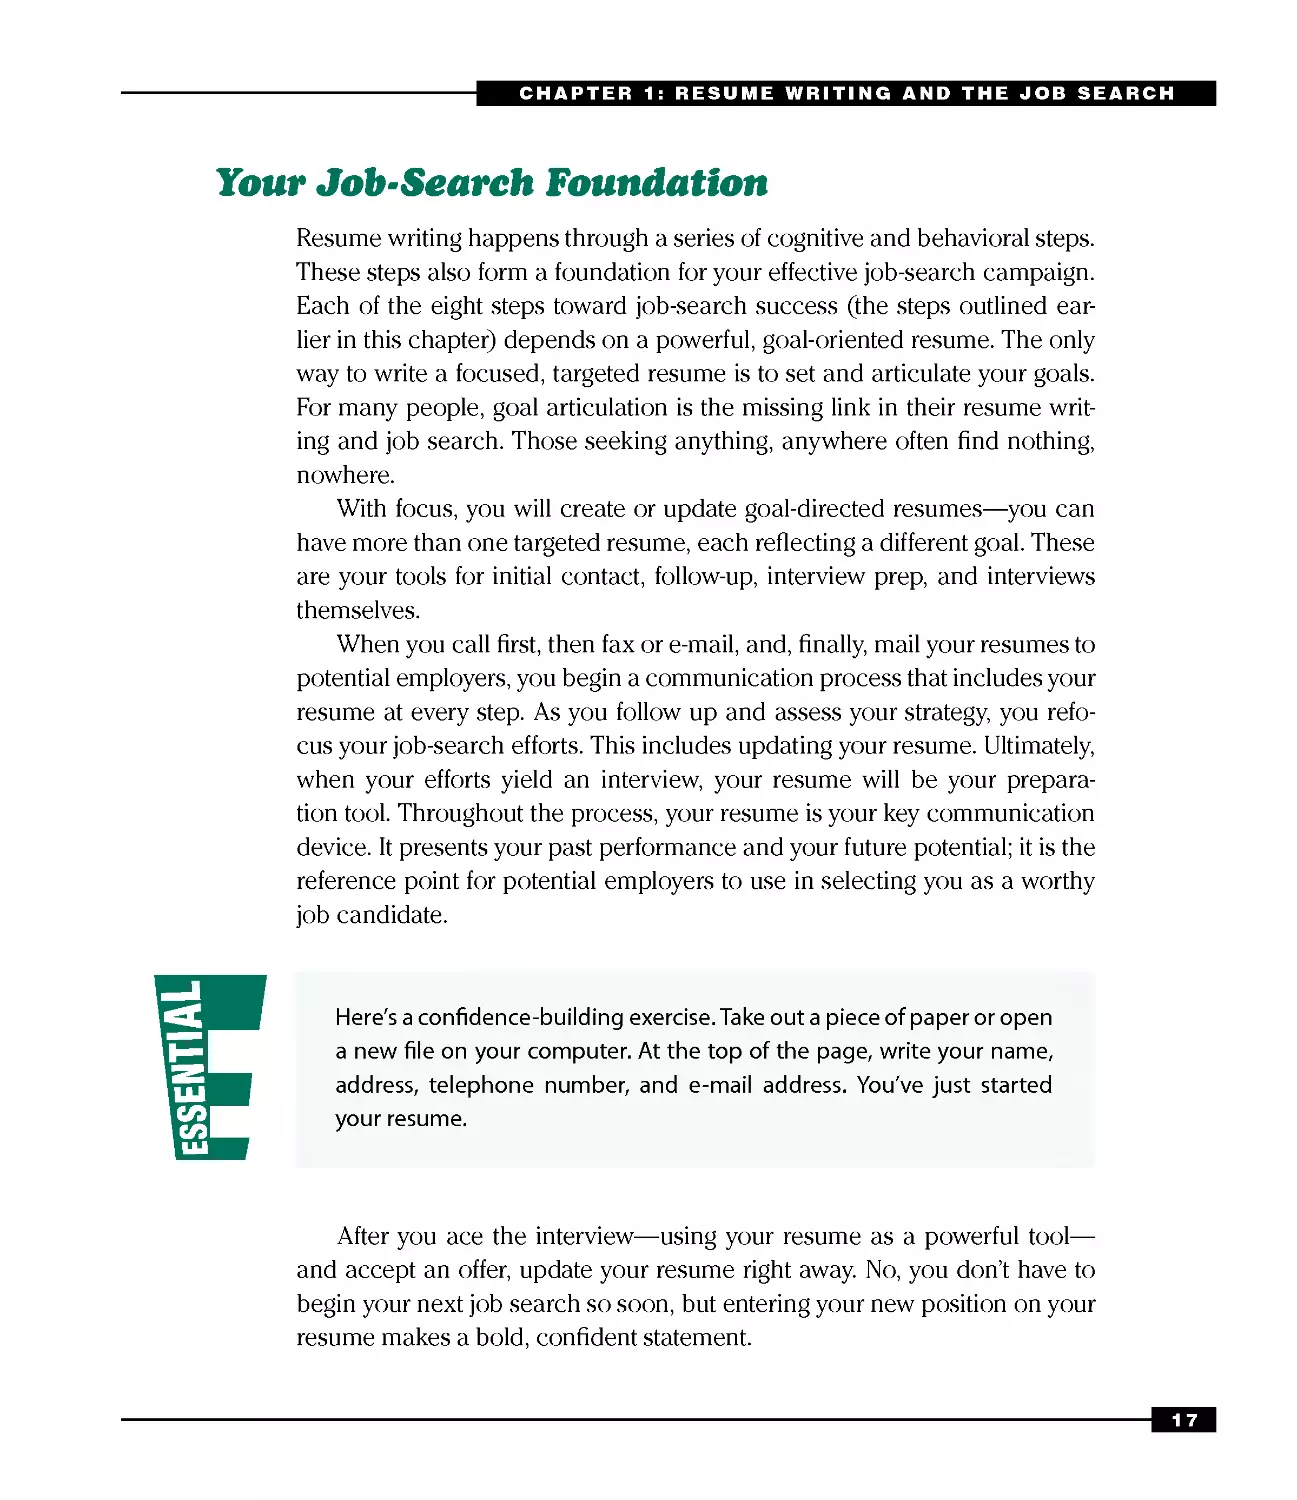 Your Job-Search Foundation